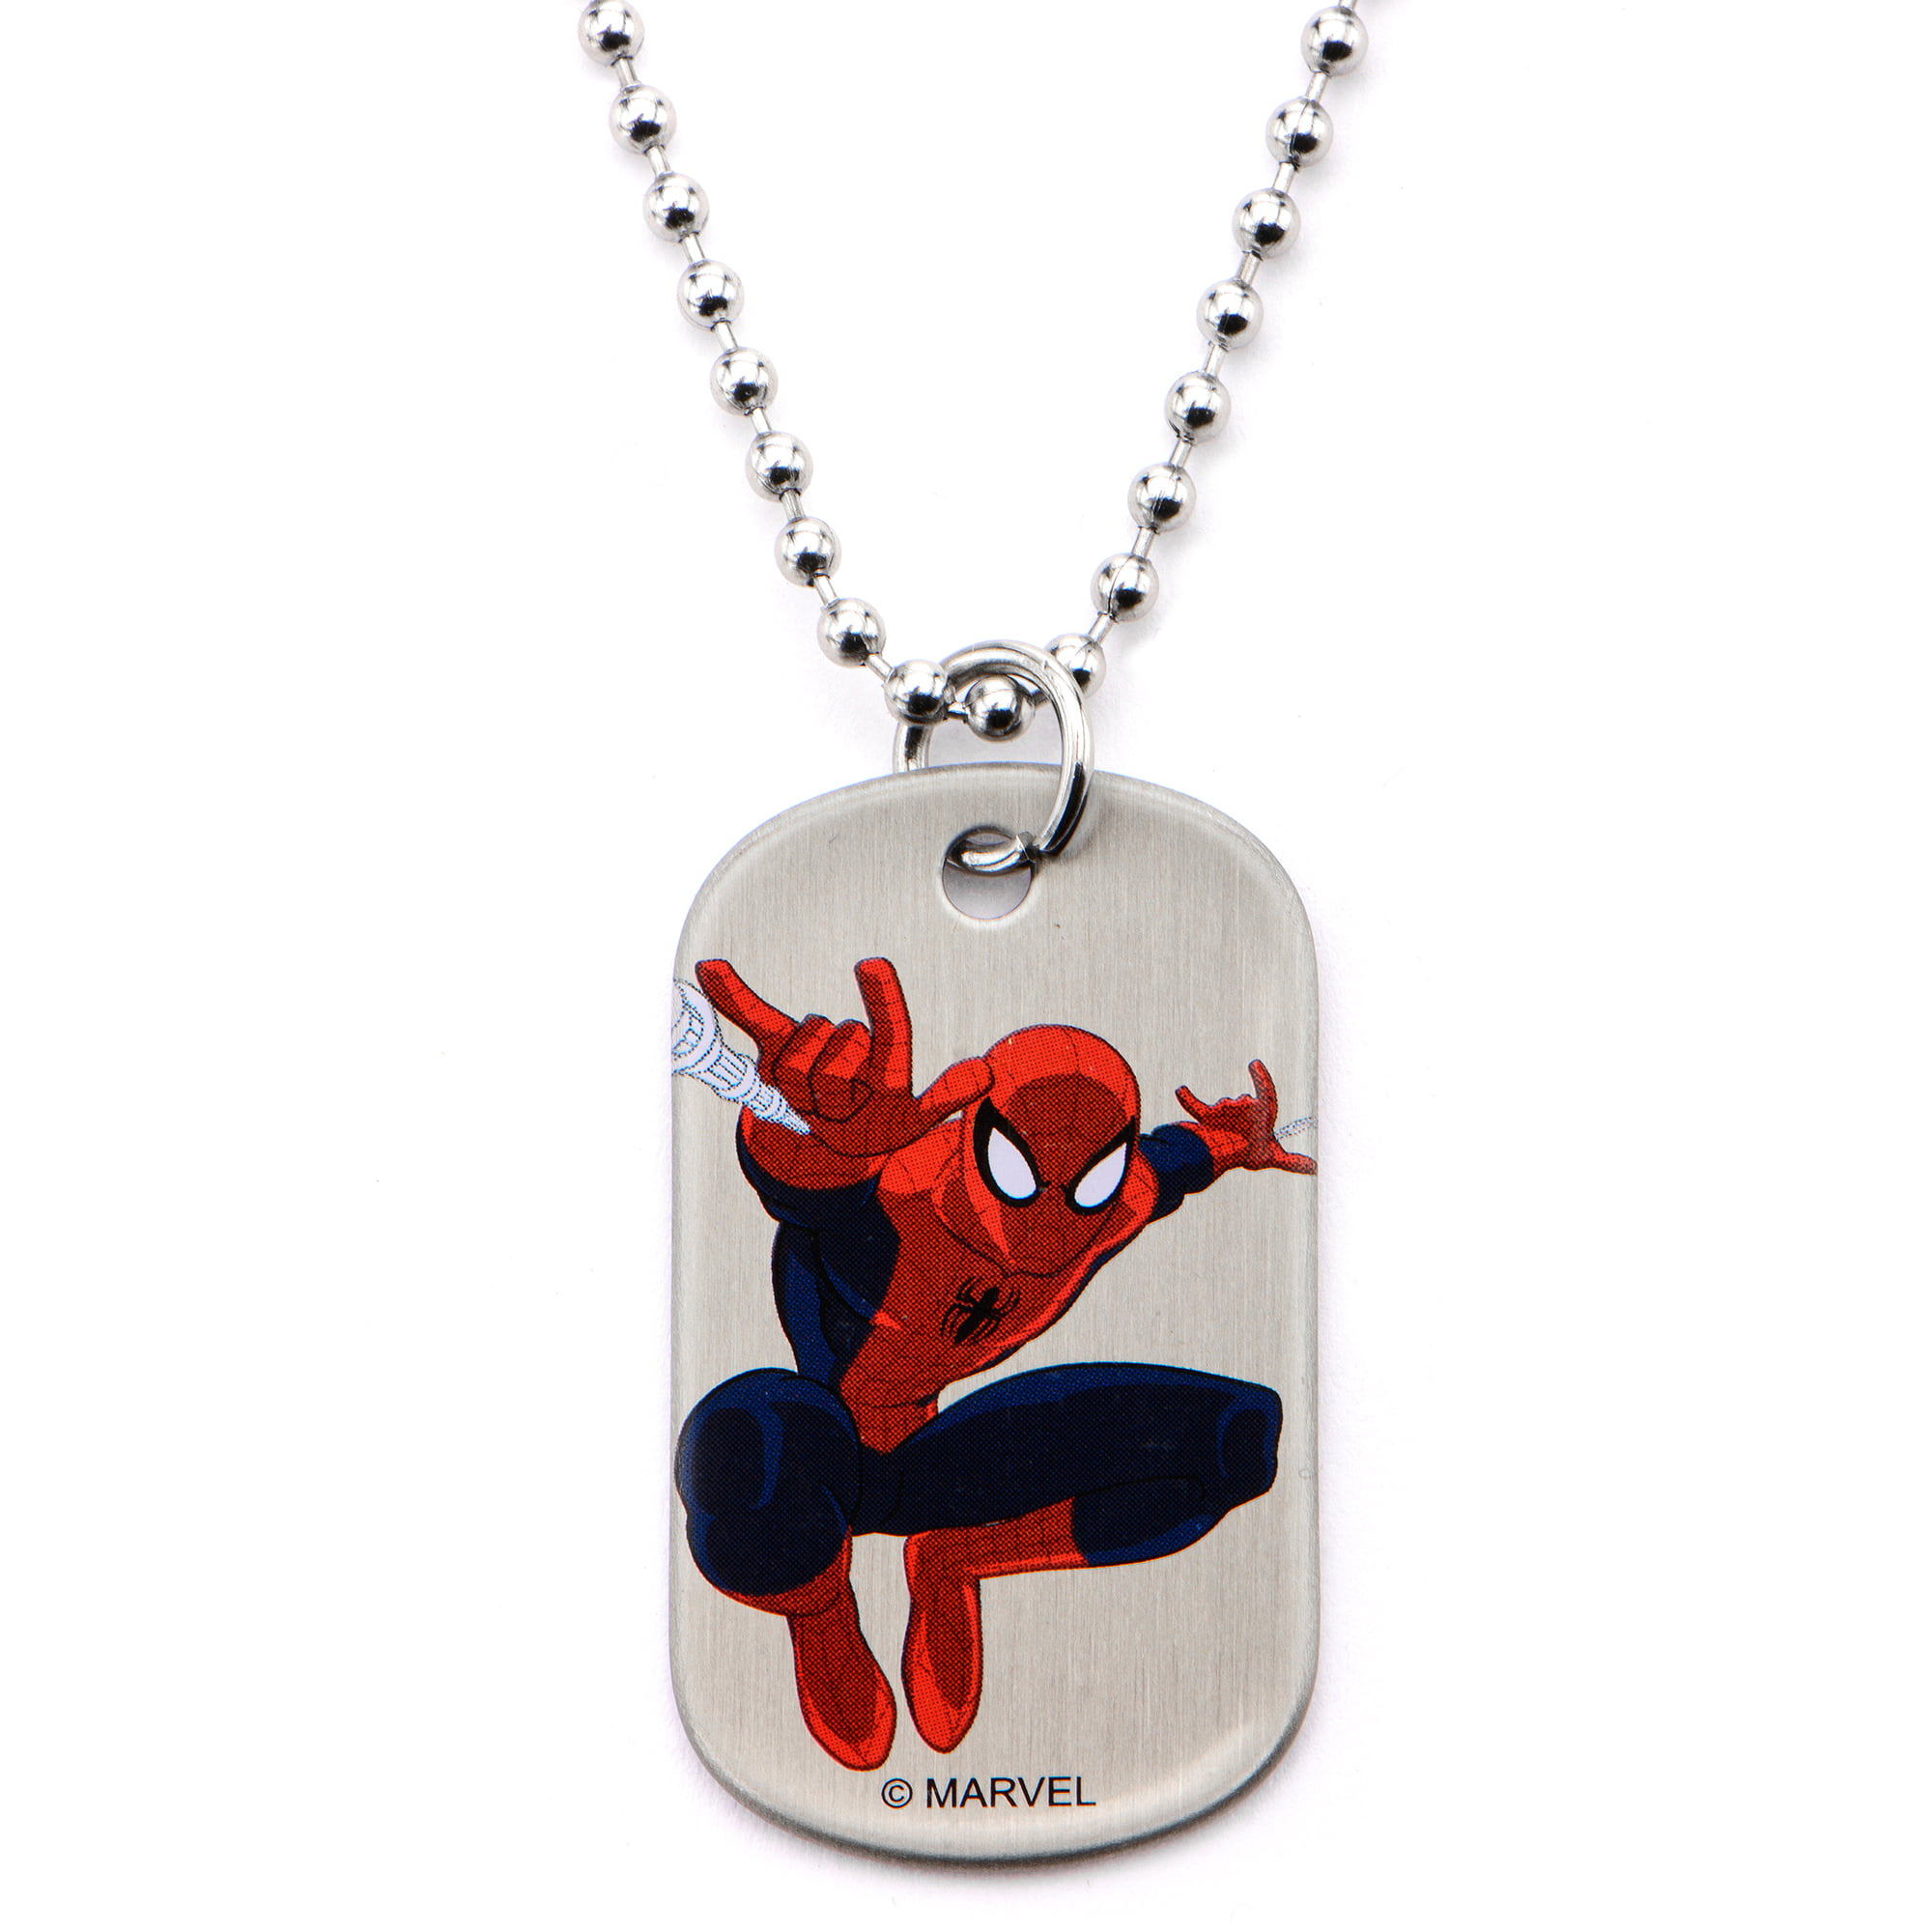 Spider-Man Game Custom Photo Dog Tag Jewelry Necklaces Pendant Chain